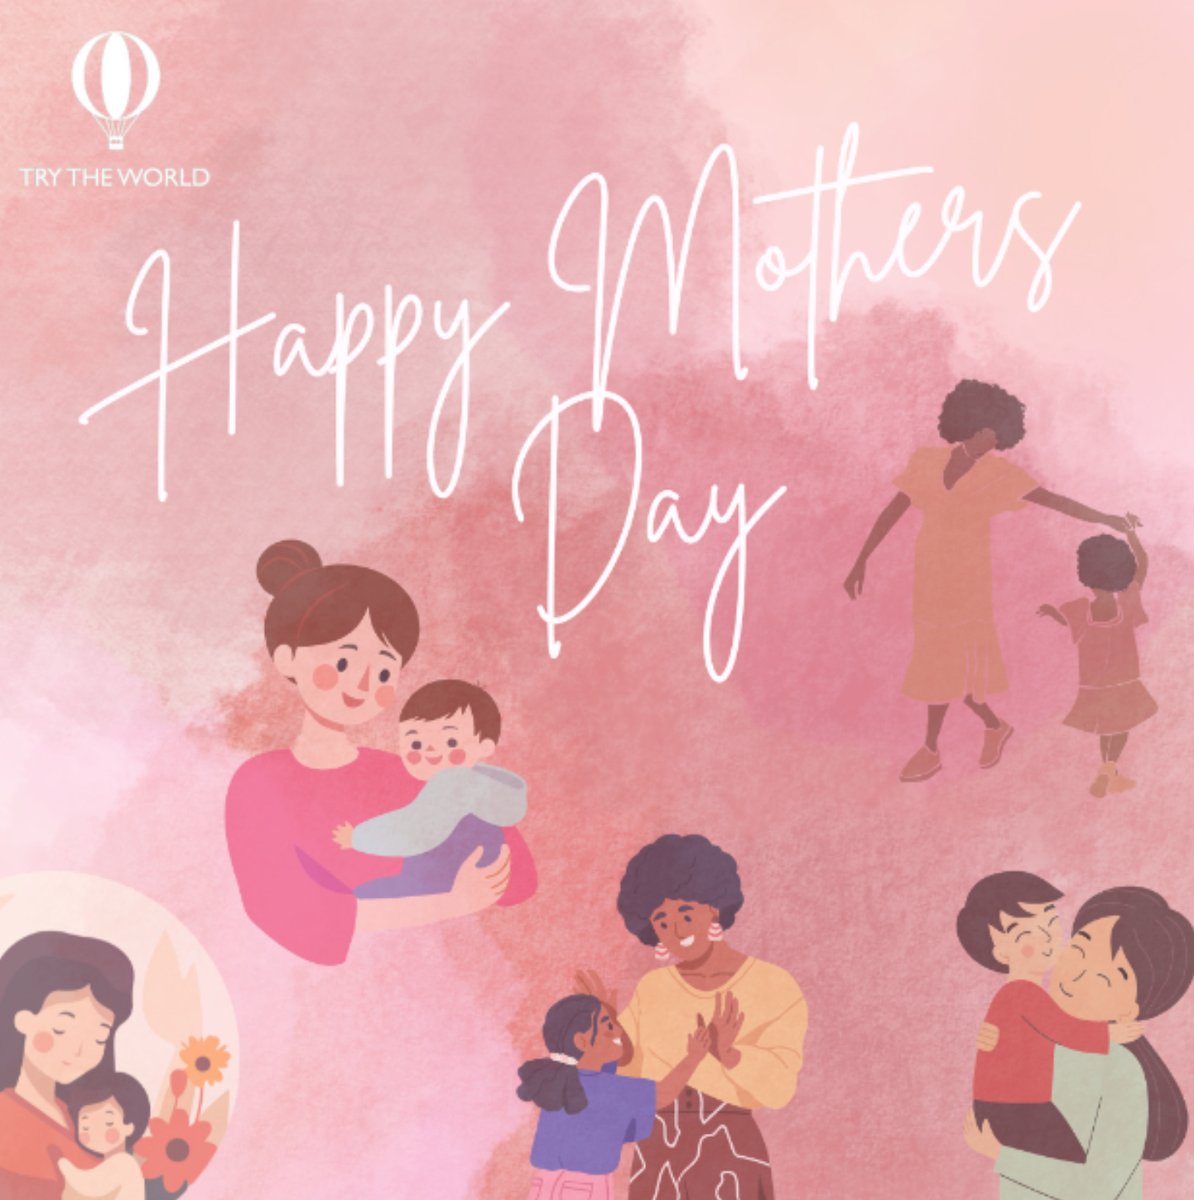 🌸 To all moms 👩 around the world, Happy Mother's Day!❤️ 🎁💐 #TryTheWorld #MothersDay #SnackTime #Mother #GlobalSnacks #MothersDayTreats #MomApprovedSnacks #GourmetSnacks #MothersDay2024 #Mothers #Mom #MomApproved